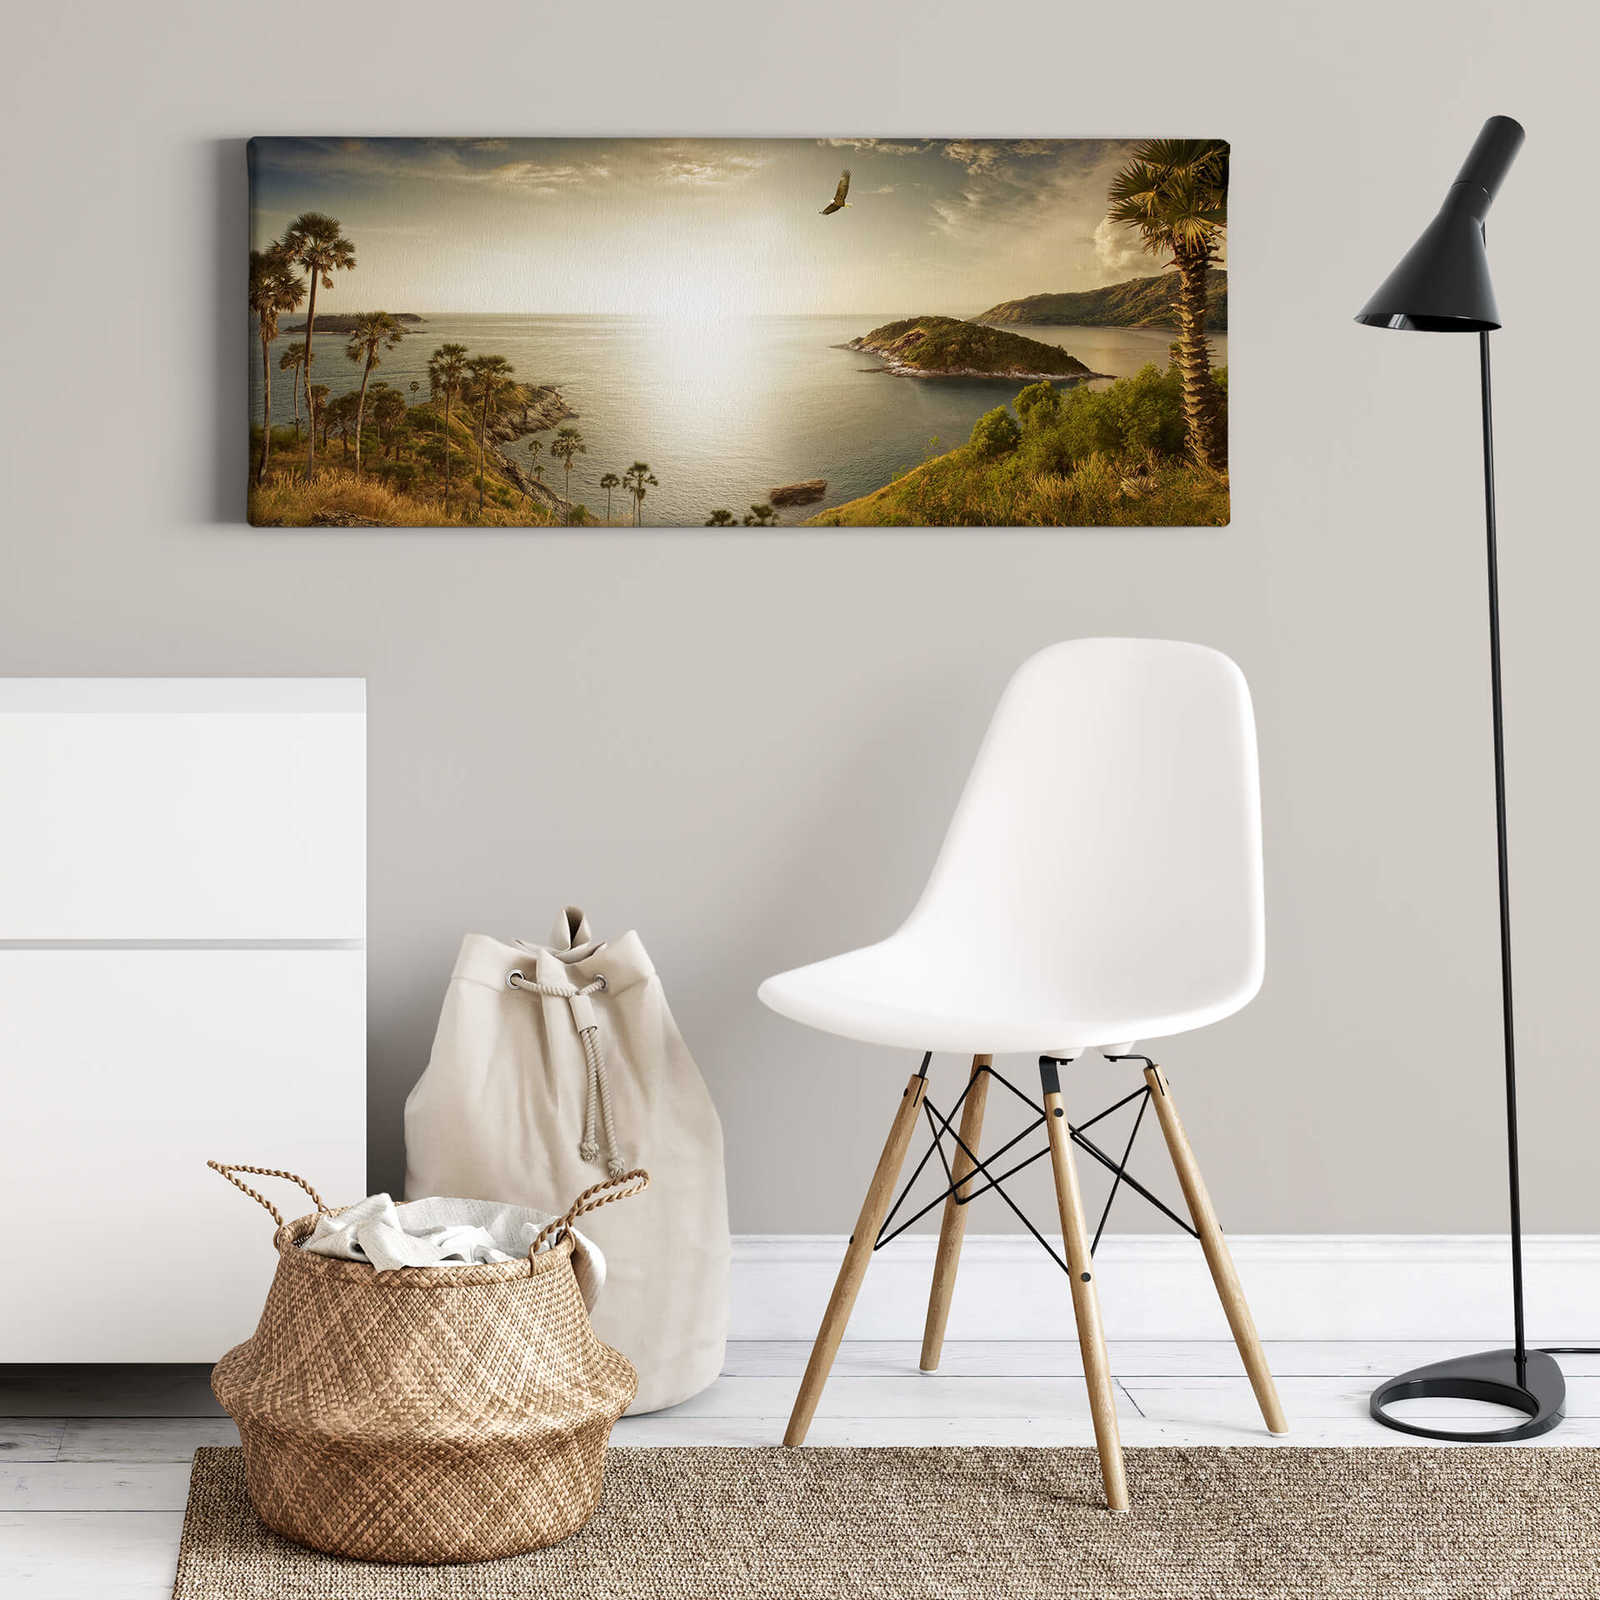             Panoramic canvas print of a sunset and tropical sea
        